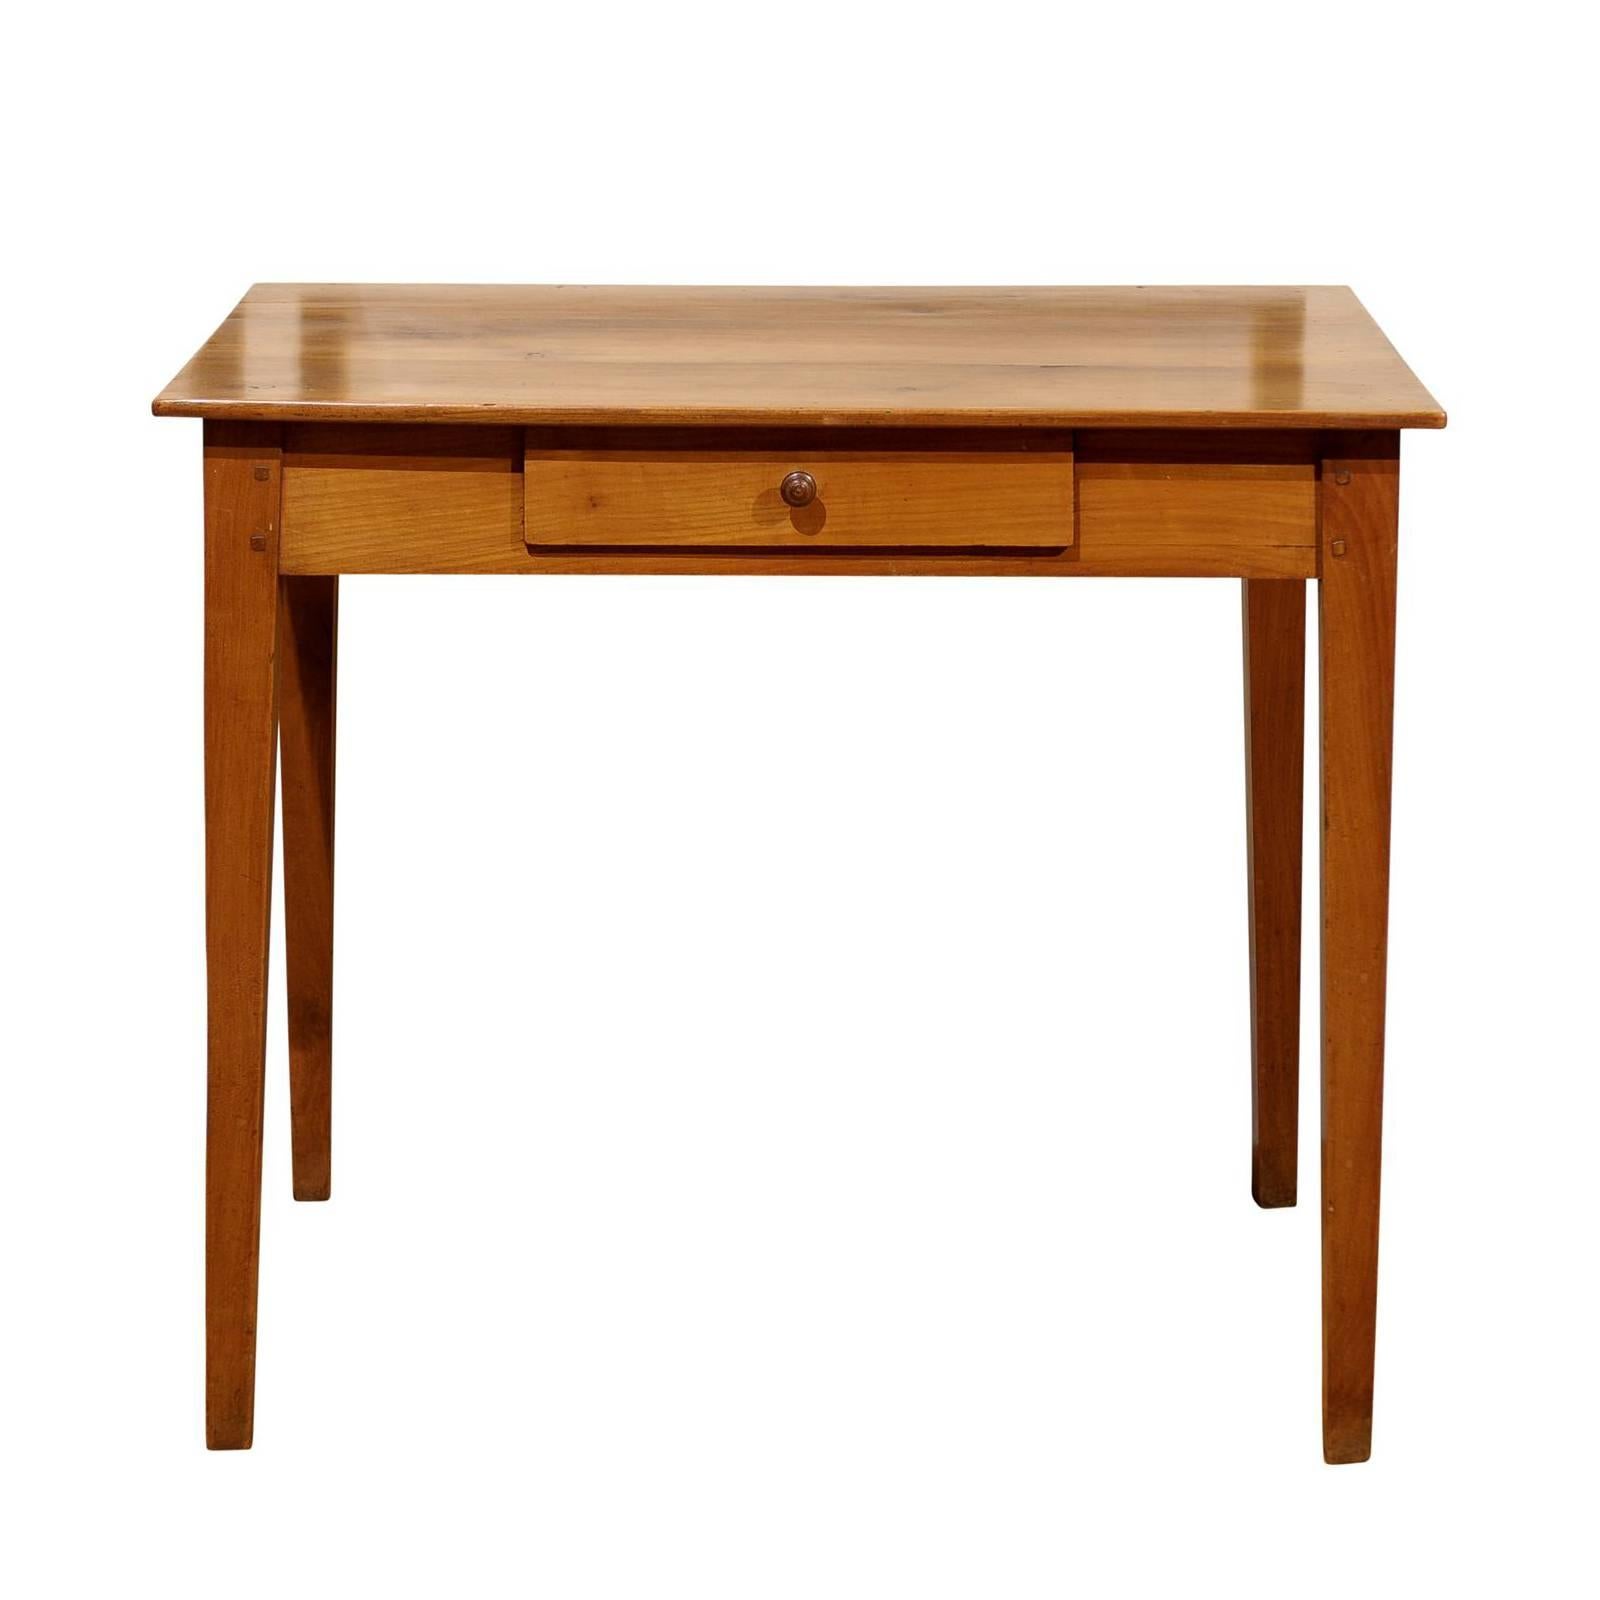 French Cherry Side Table with Drawer, circa 1880